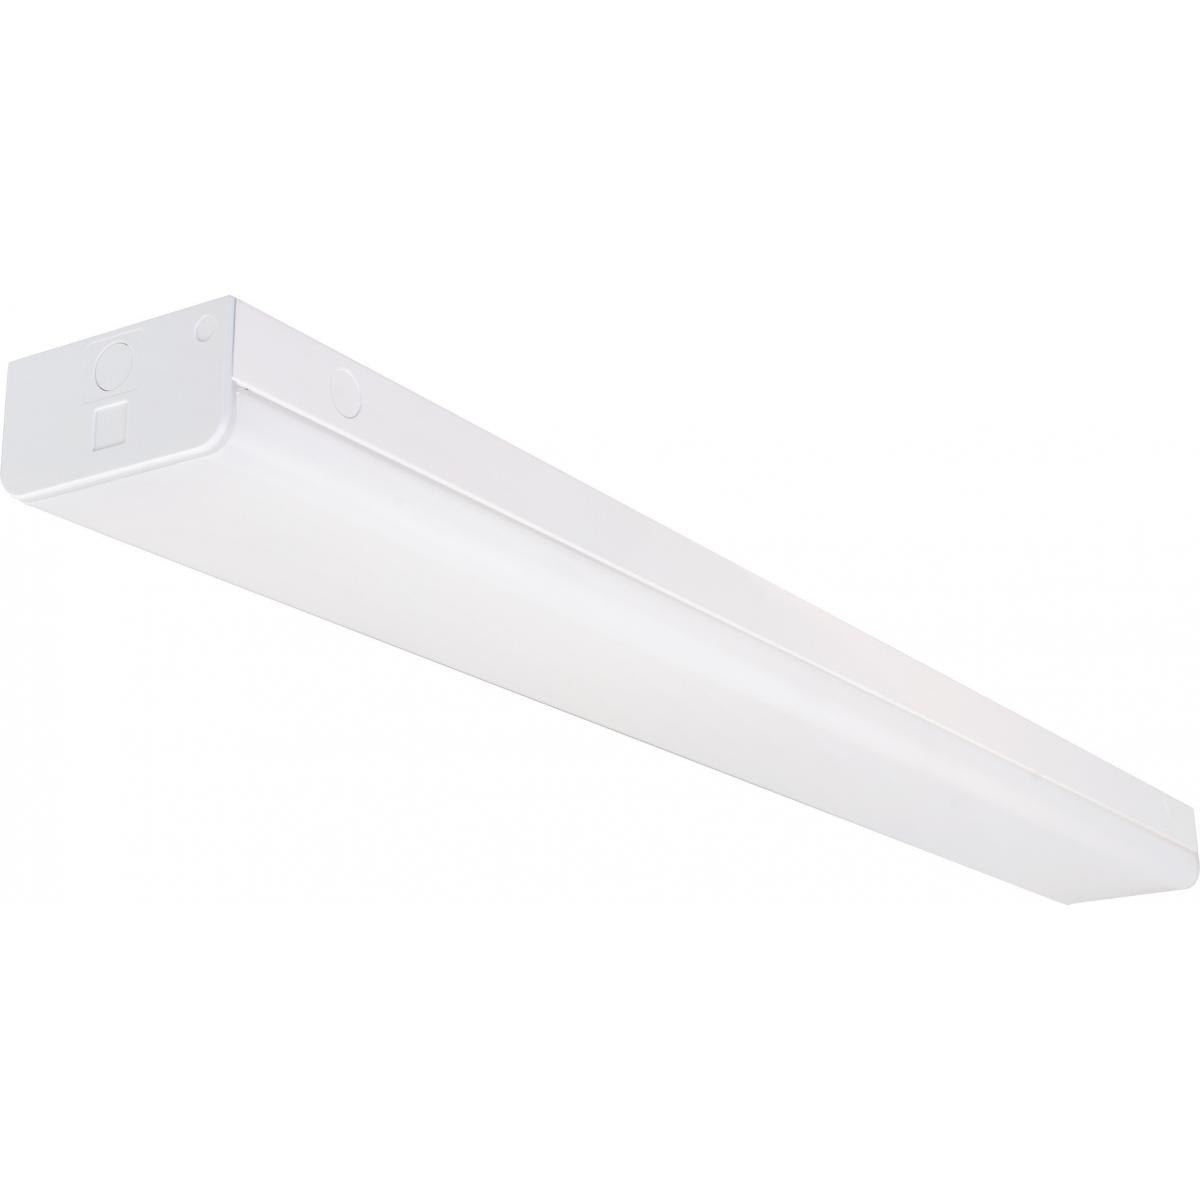 Satco 65-1133 LED 4 ft. Wide Strip Light 38W 5000K White Finish with Knockout